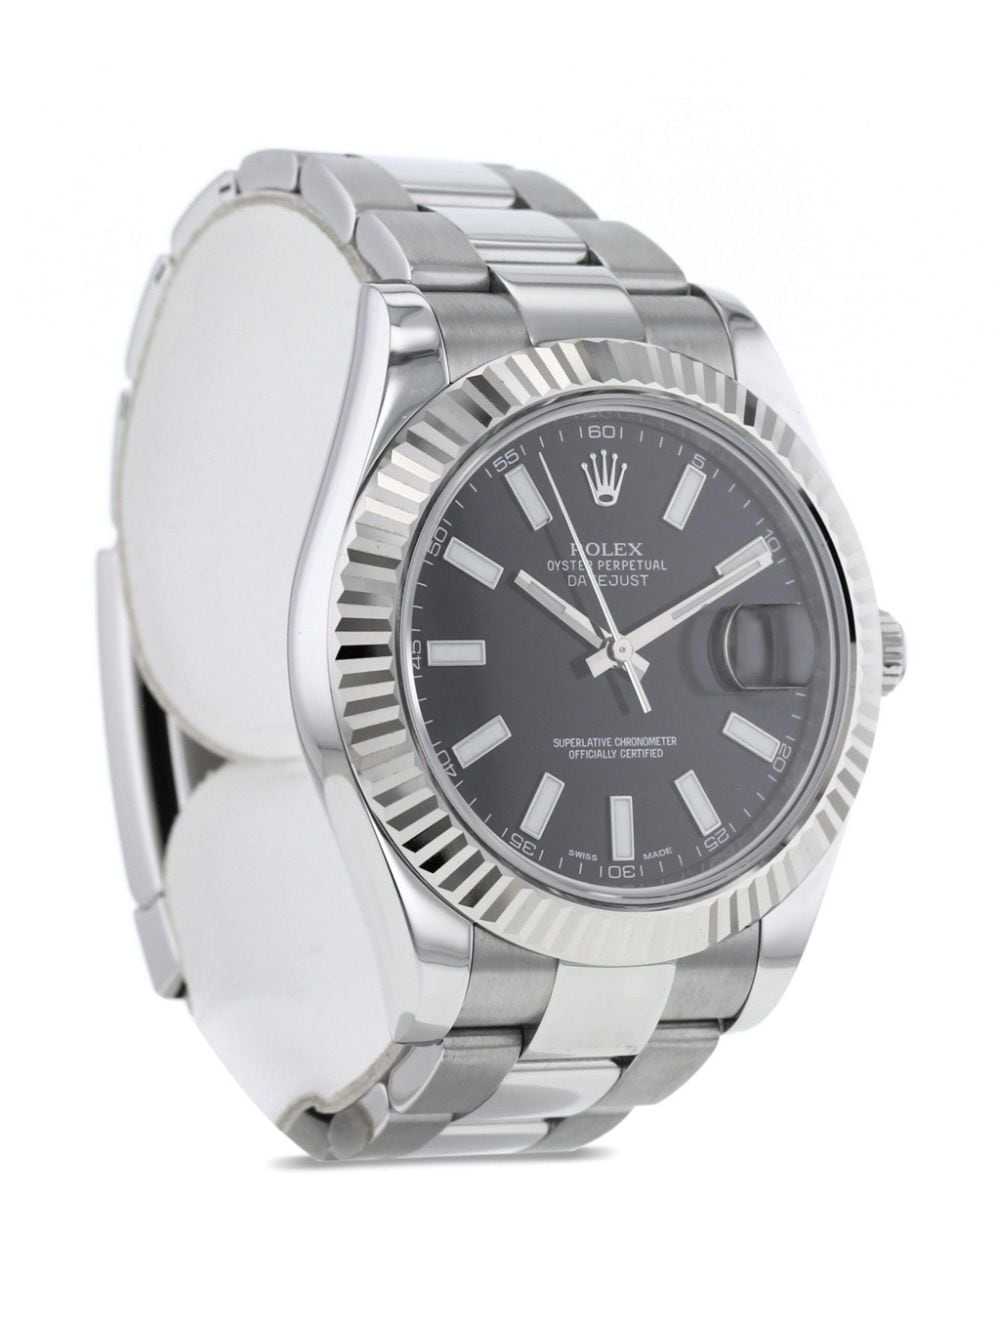 Rolex 2013 pre-owned Datejust 41mm - Black - image 3